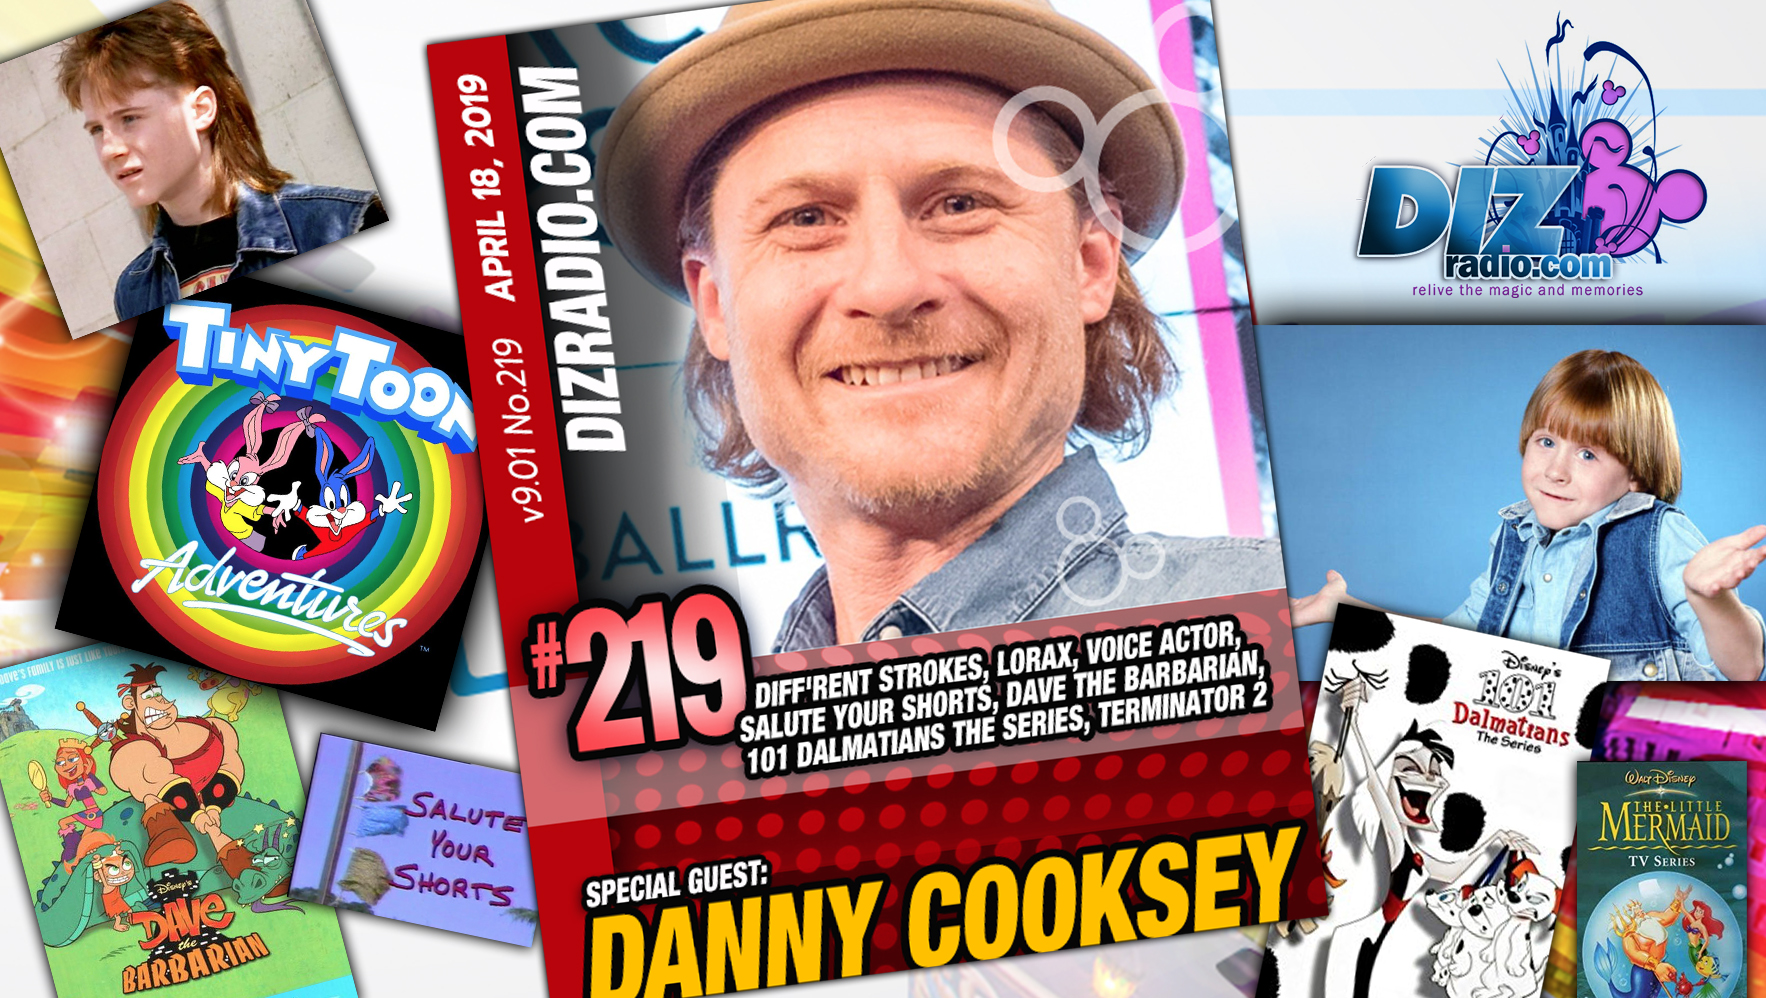 DANNY COOKSEY (Different Strokes, Dukes of Hazard, T2, Salute Your Shorts, Dave the Barbarian, Kick Buttowski, 101 Dalmatian Series, Tiny Toon Adventures, Ren & Stimpy, Little Mermaid, Musician and more)